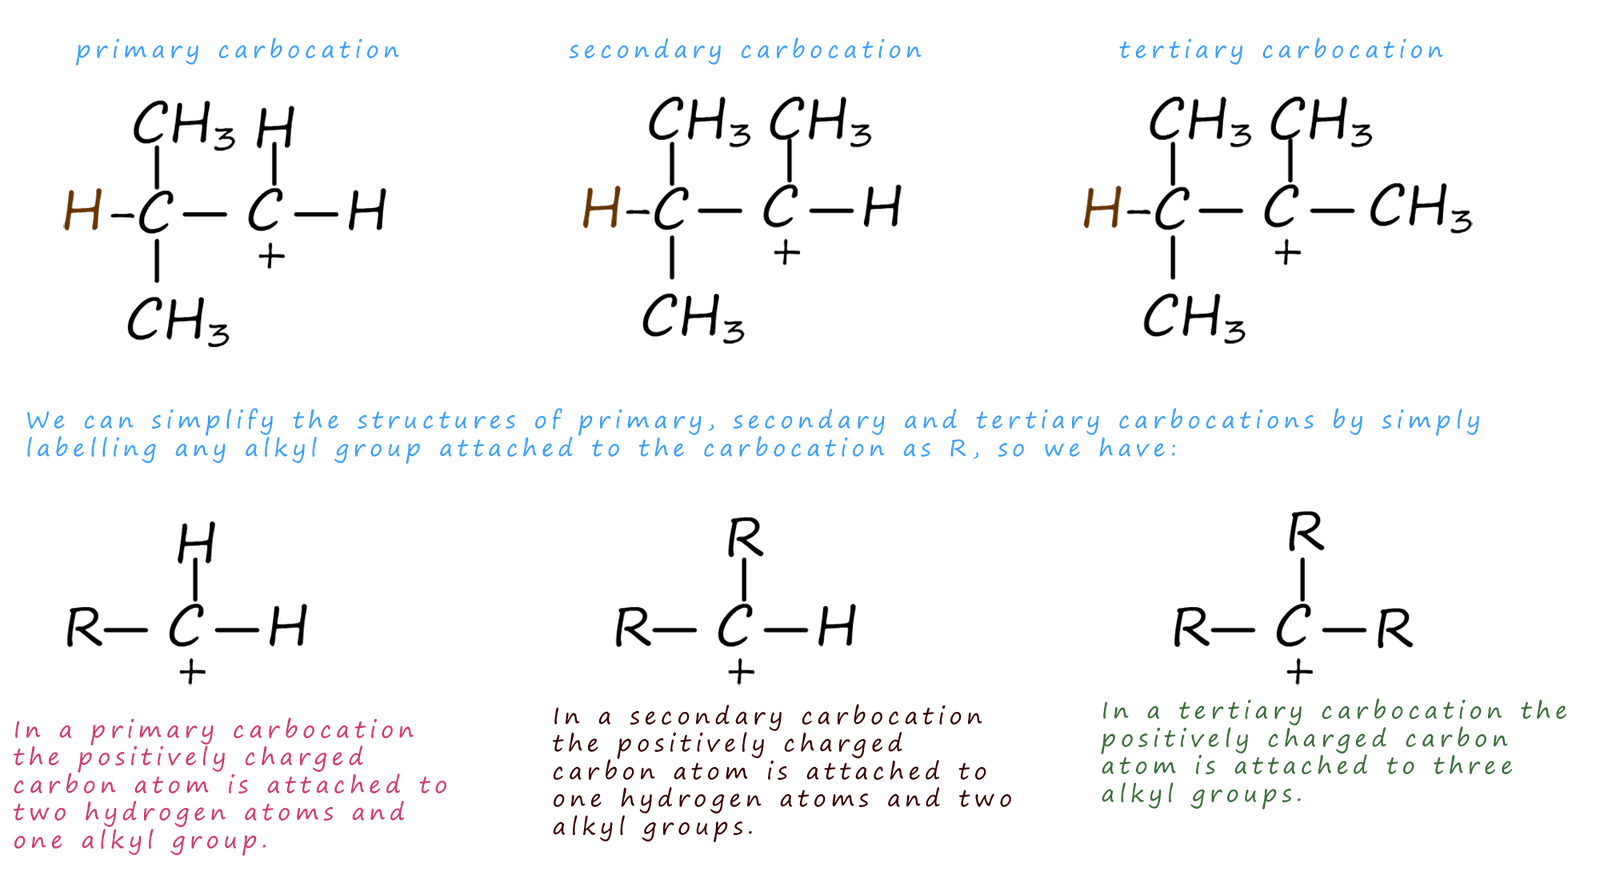 The structure and differences between primary, secondary and tertiary carbocations or carbonium ions.